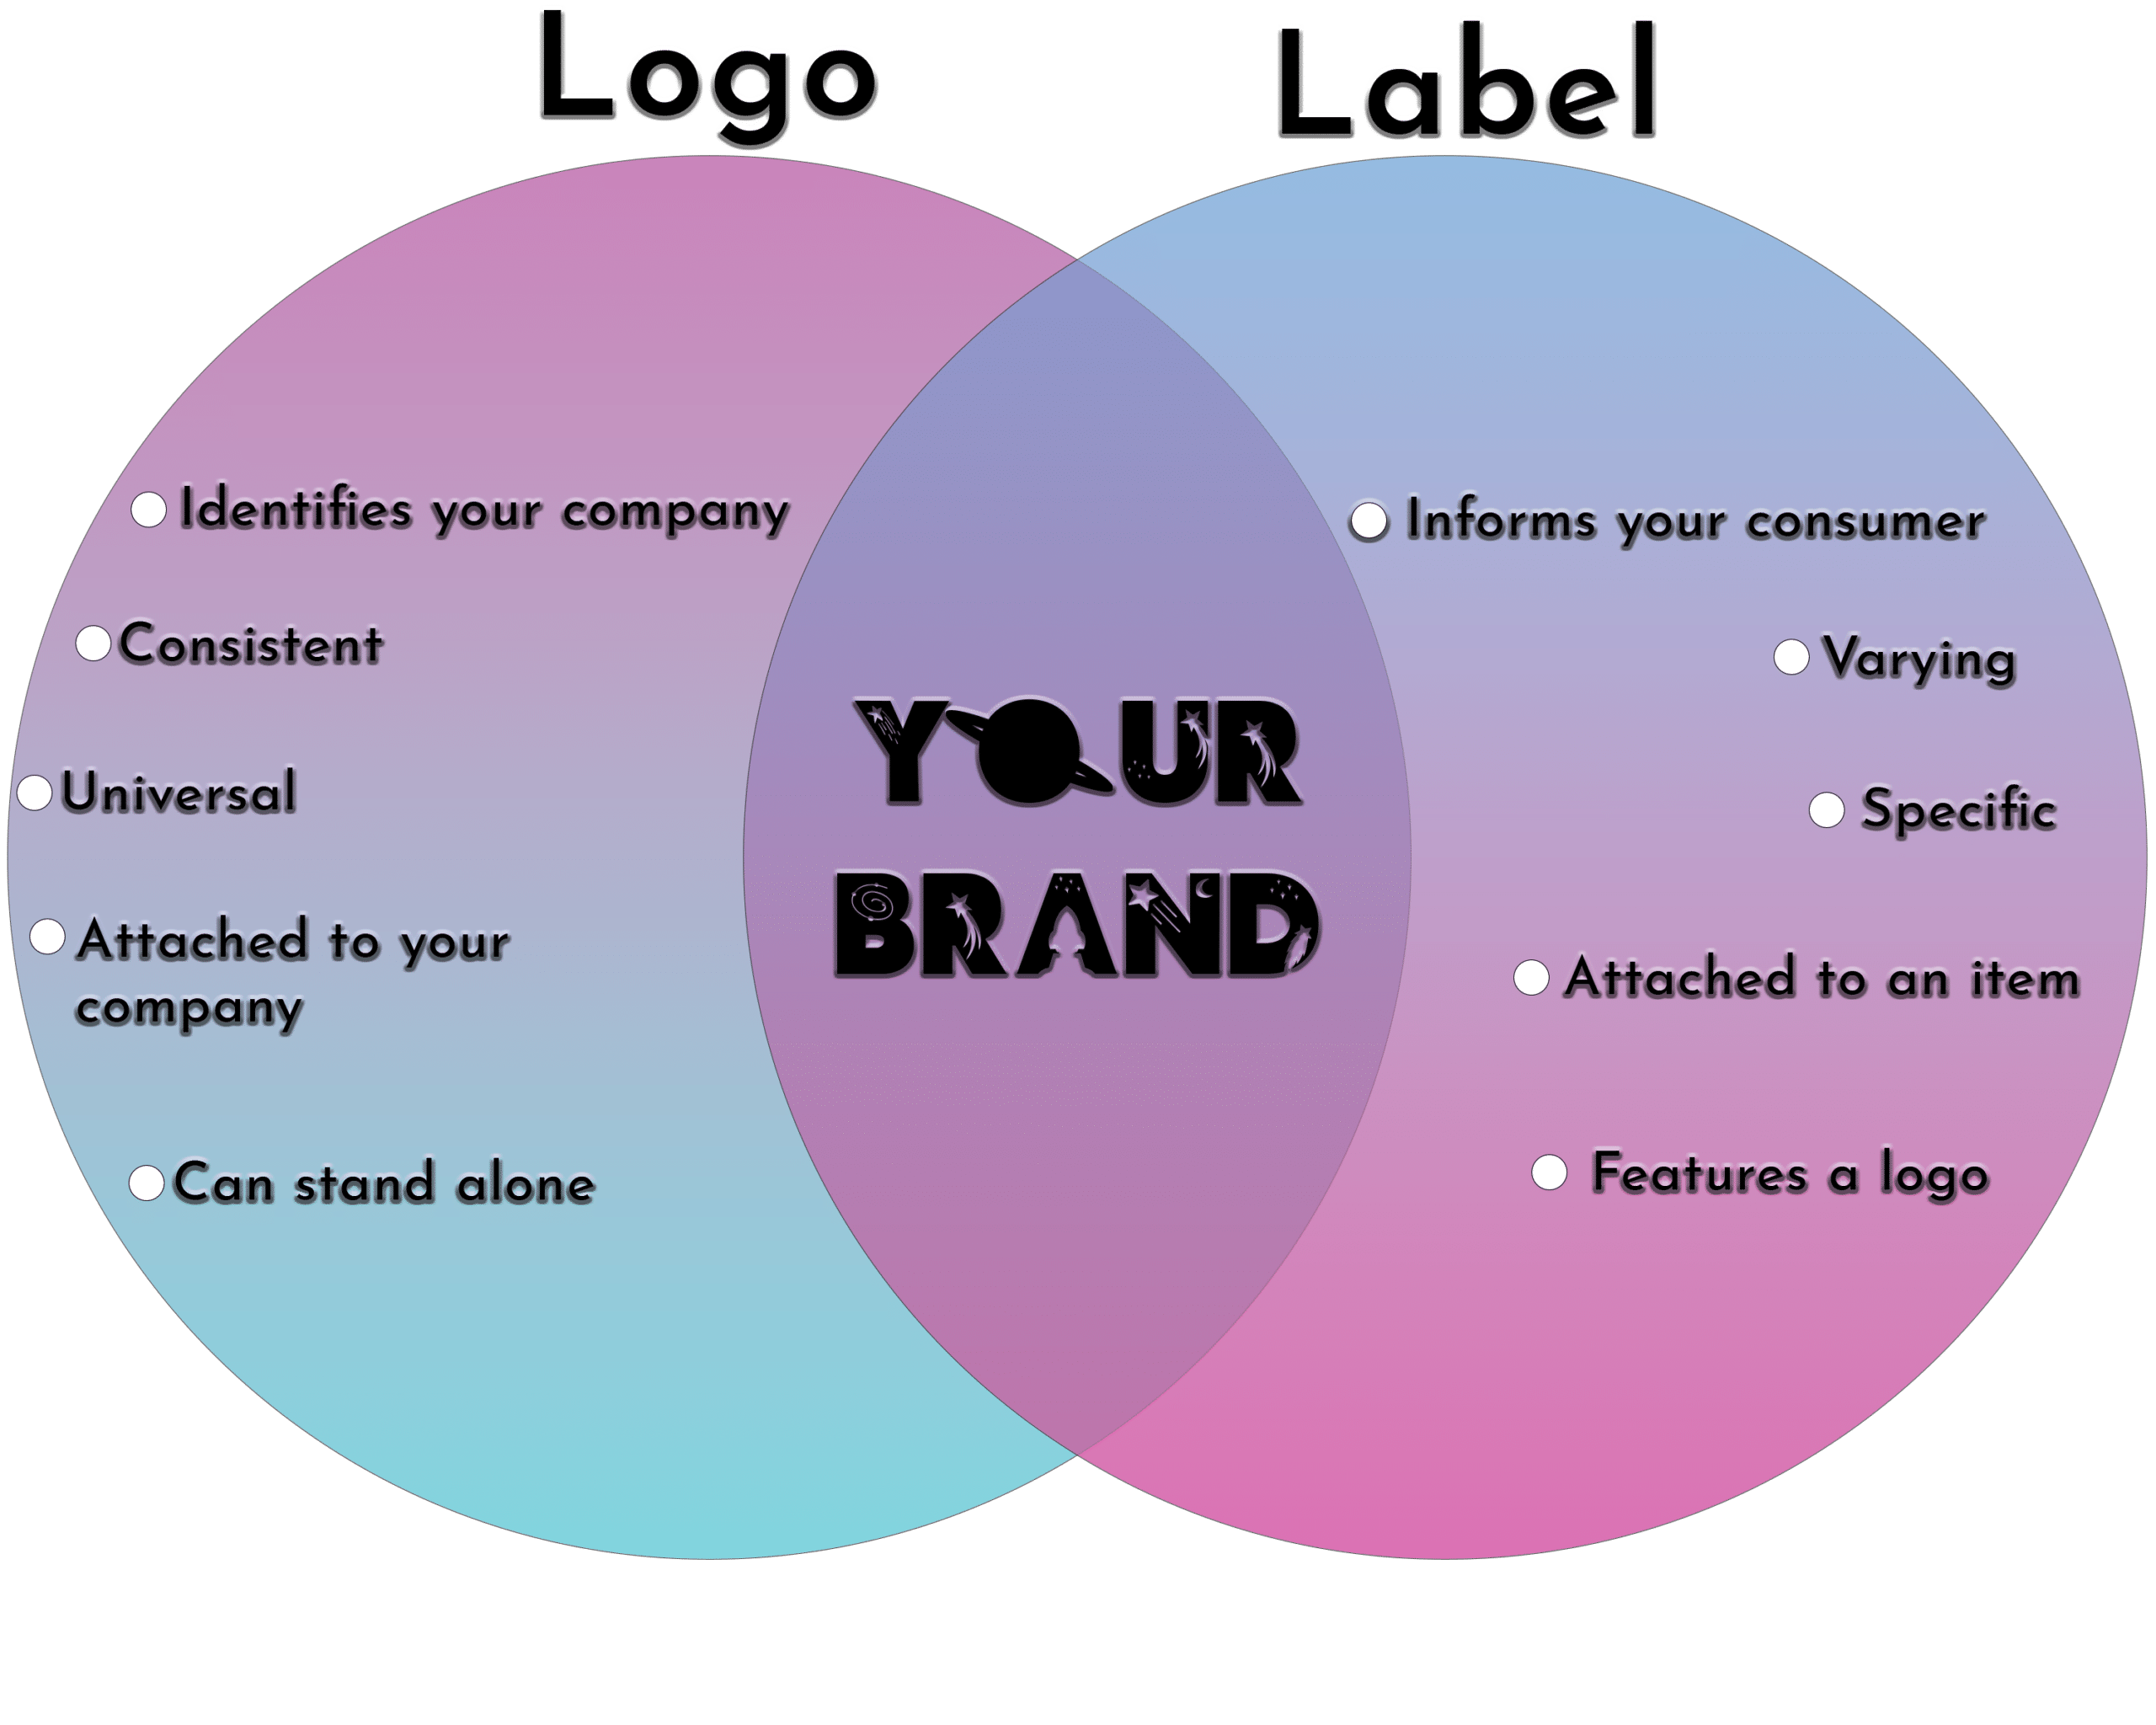 Brands and Labels